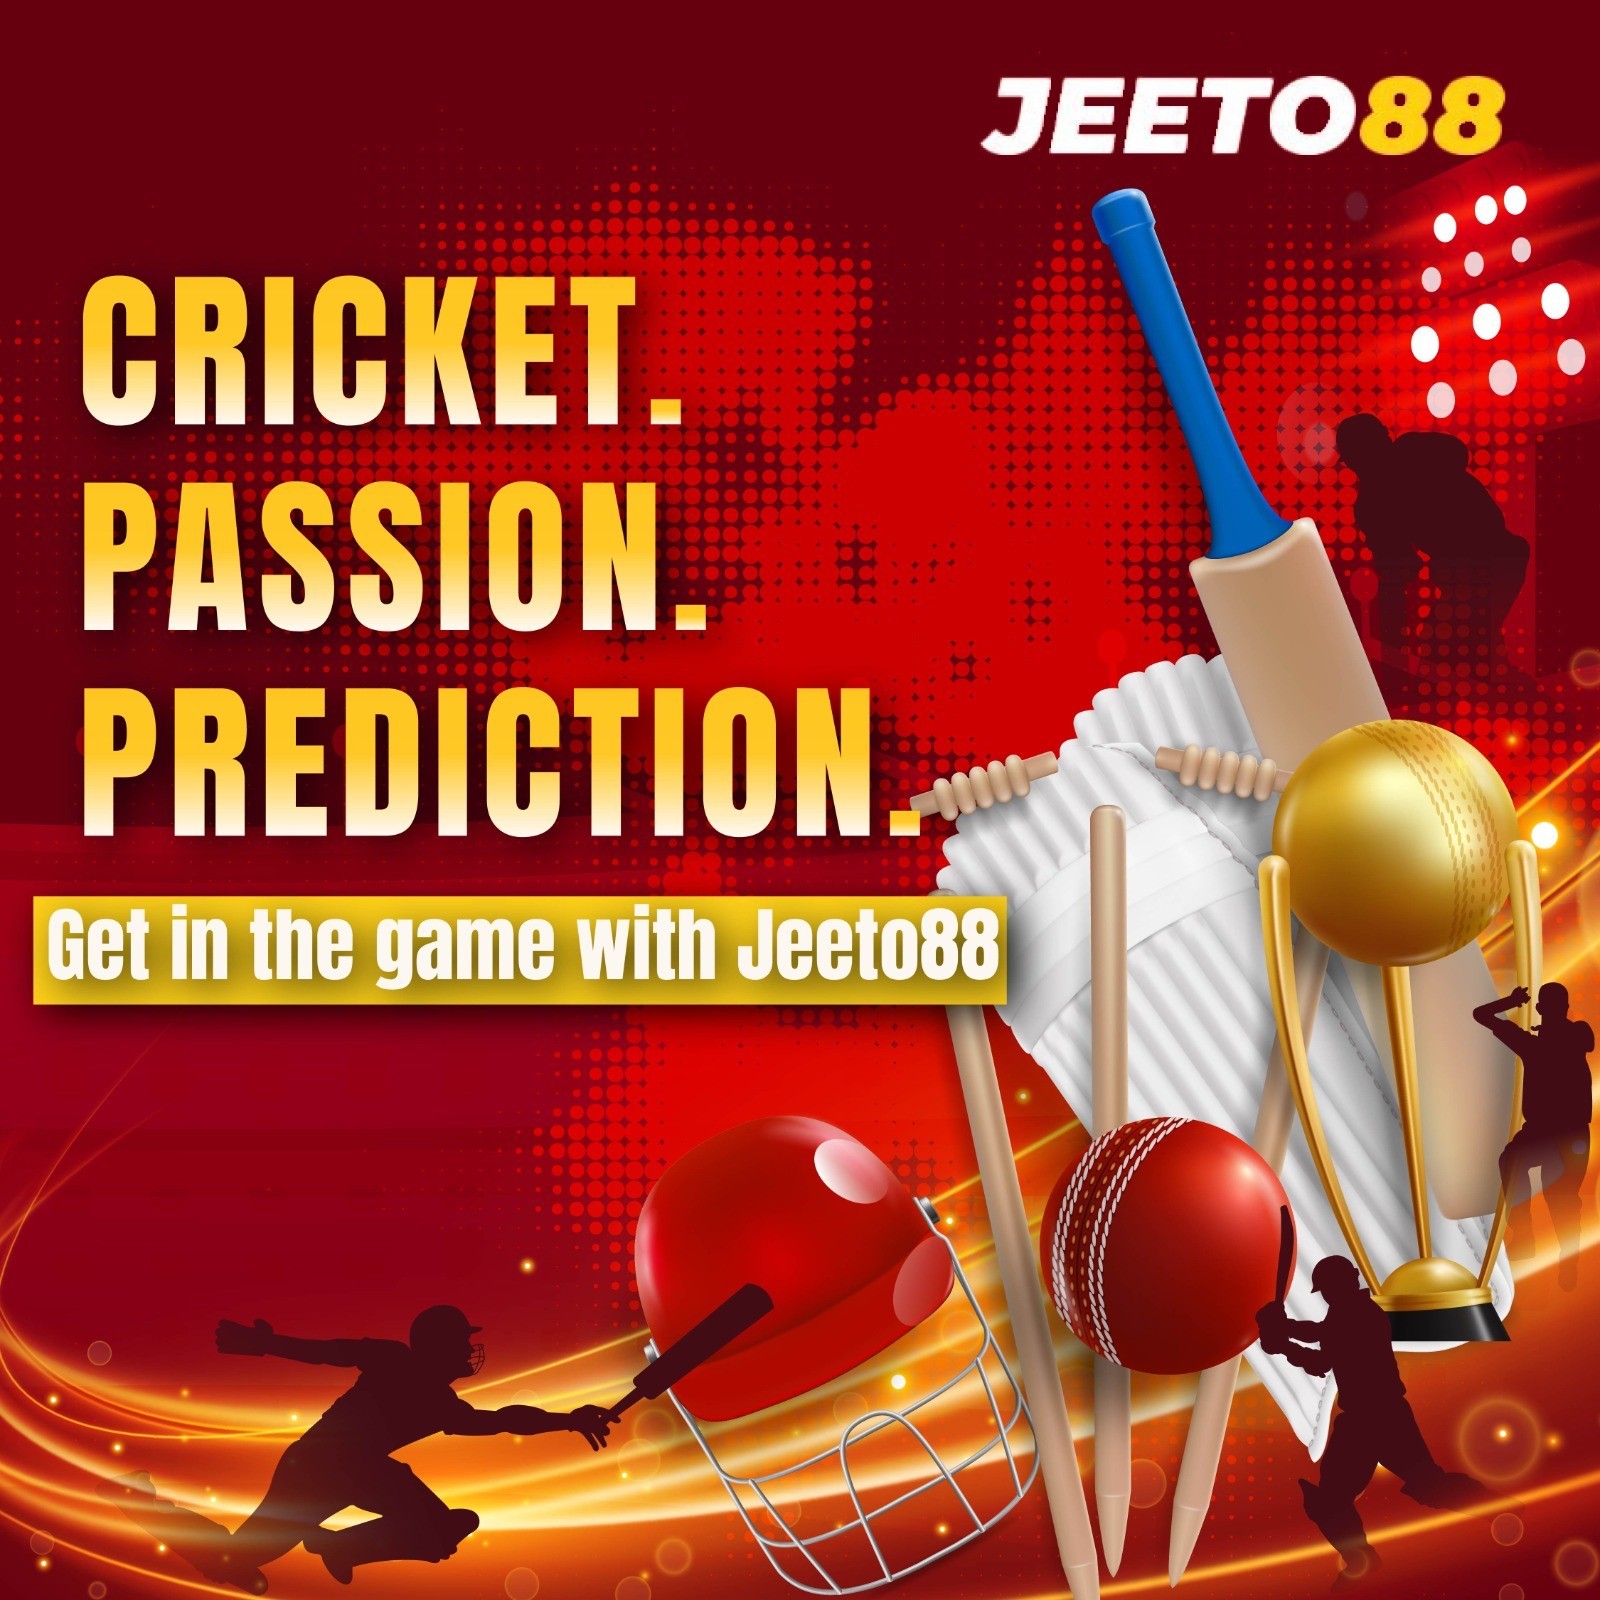 Cricket. Passion. Prediction. Get in the game with Jeeto88